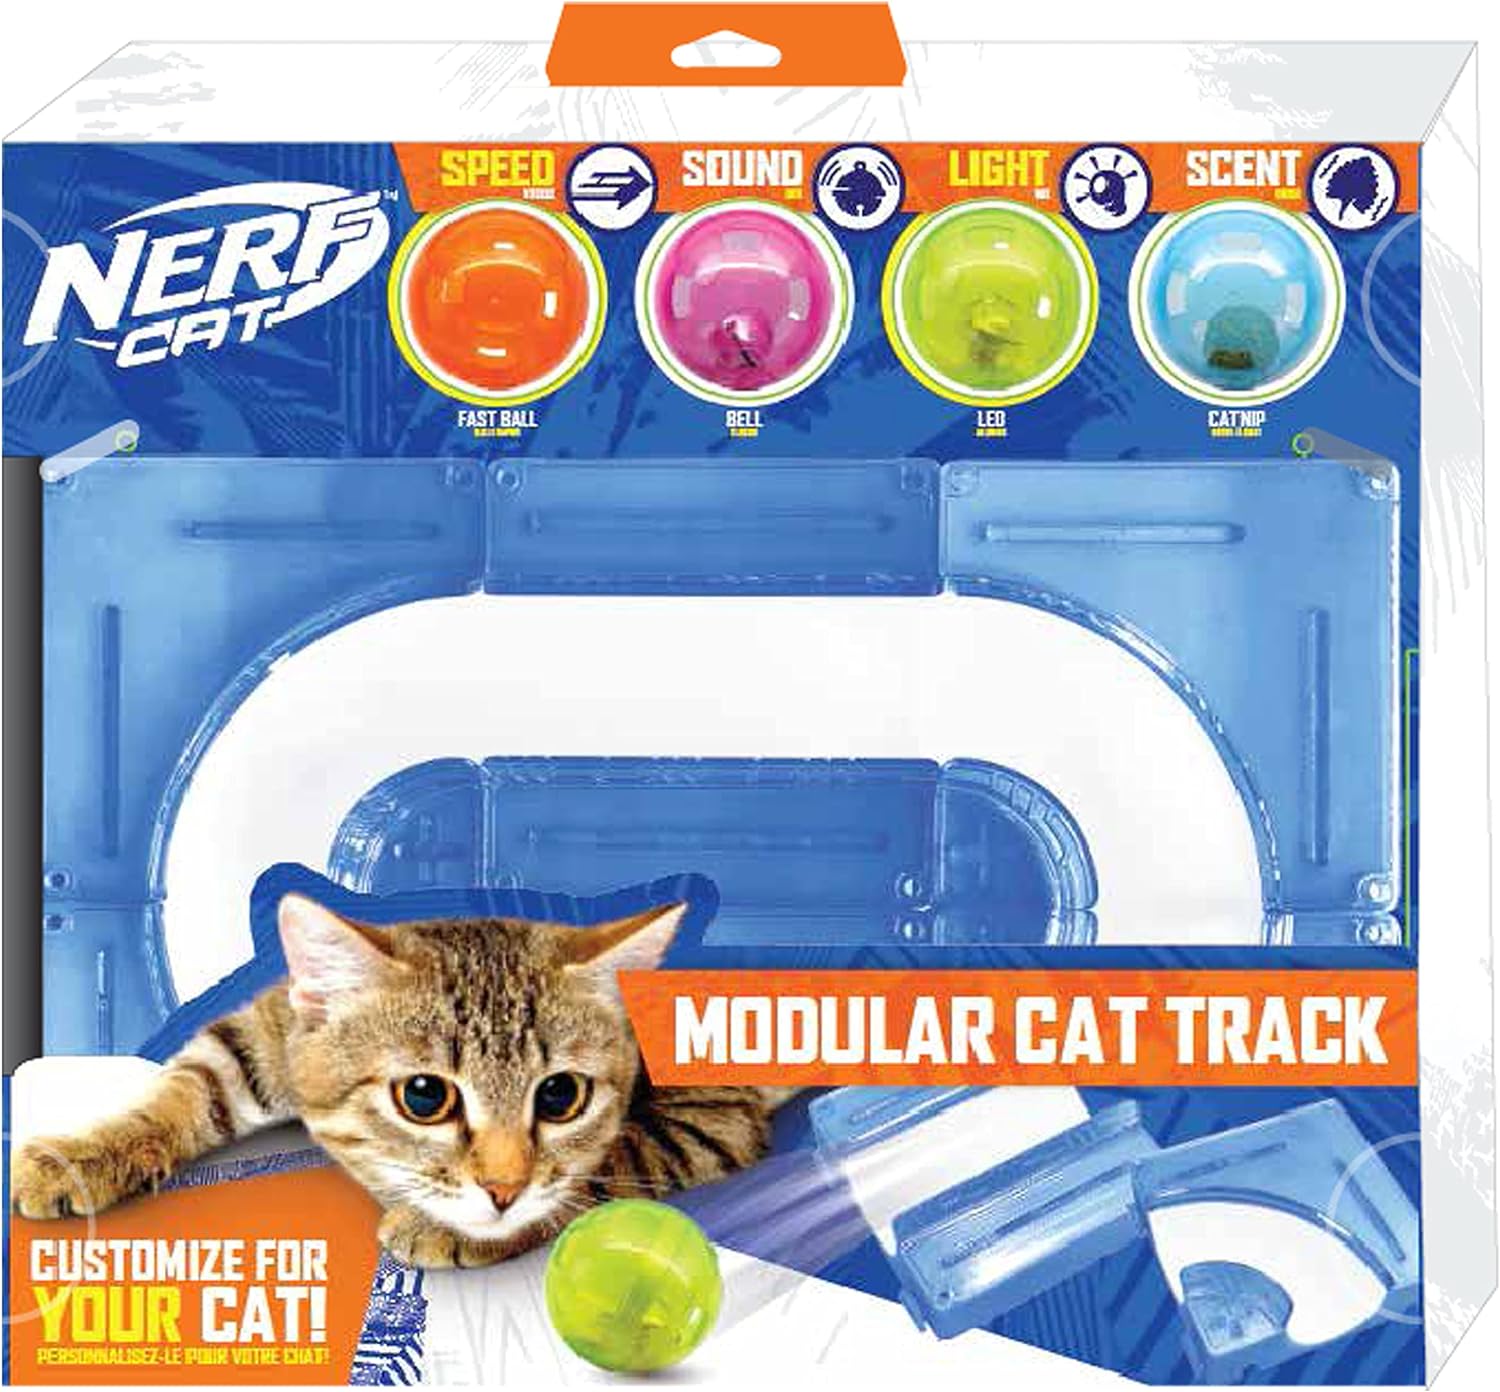 Nerf Cat Gift Set Box - 15in x 10in ABS Turbo Cat Track with 2 inch Hollow Ball and 2 inch Bell Ball and 2 inch LED Ball and 2 inch Catnip Ball